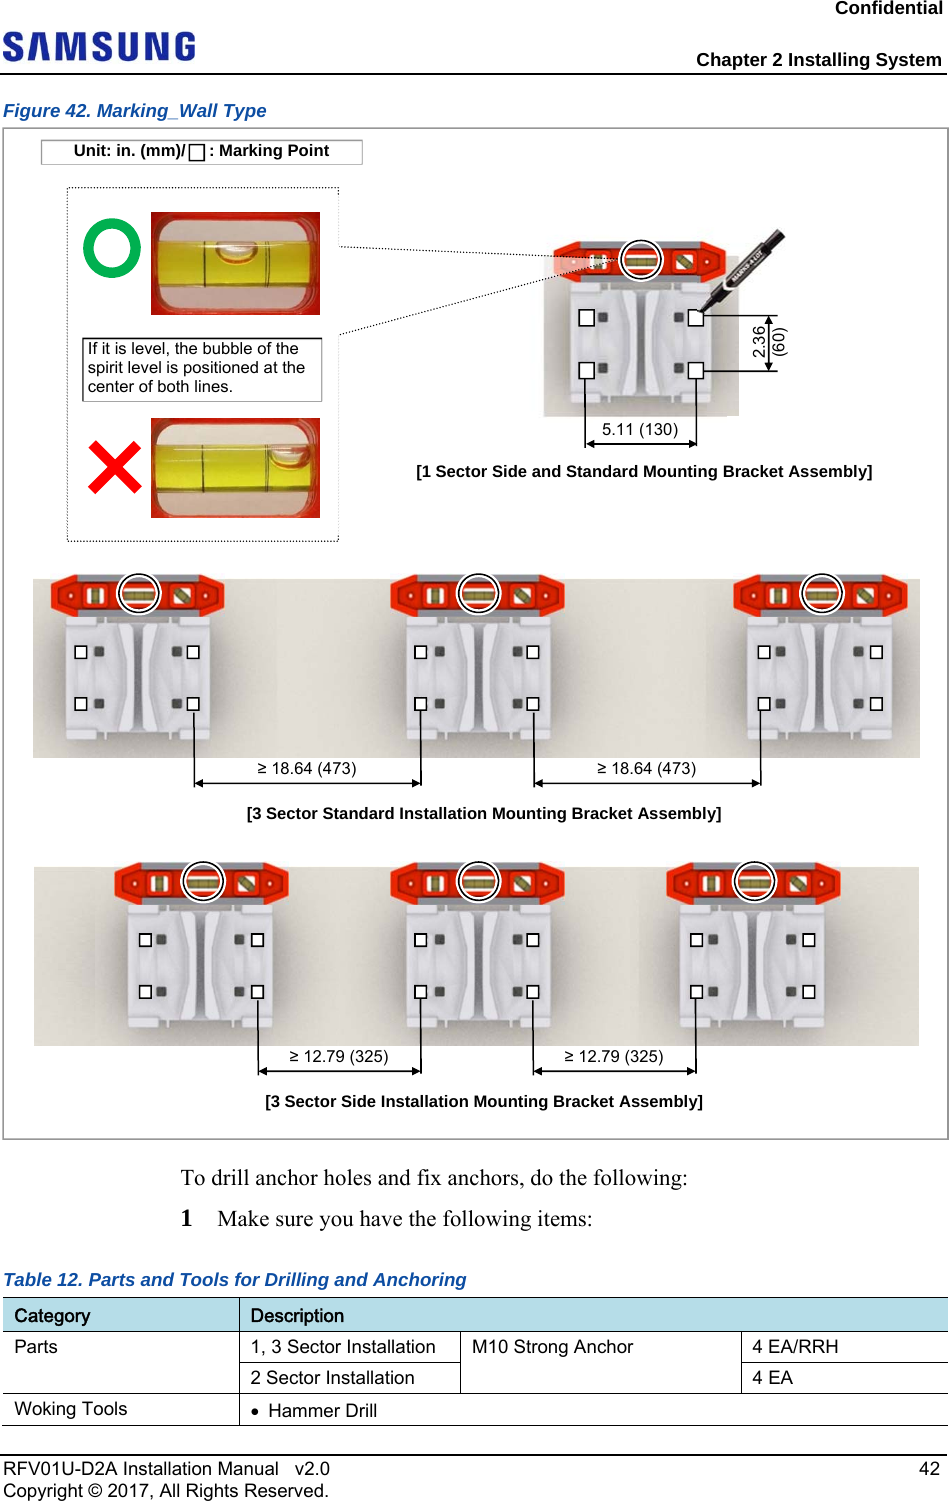 Confidential  Chapter 2 Installing System RFV01U-D2A Installation Manual   v2.0   42 Copyright © 2017, All Rights Reserved. Figure 42. Marking_Wall Type  To drill anchor holes and fix anchors, do the following: 1  Make sure you have the following items: Table 12. Parts and Tools for Drilling and Anchoring Category  Description Parts  1, 3 Sector Installation  M10 Strong Anchor  4 EA/RRH 2 Sector Installation  4 EA Woking Tools   Hammer Drill  If it is level, the bubble of the spirit level is positioned at the center of both lines. [1 Sector Side and Standard Mounting Bracket Assembly] 5.11 (130)[3 Sector Standard Installation Mounting Bracket Assembly] ≥ 18.64 (473) Unit: in. (mm)/     : Marking Point 2.36  (60) ≥ 18.64 (473) [3 Sector Side Installation Mounting Bracket Assembly] ≥ 12.79 (325)  ≥ 12.79 (325) 